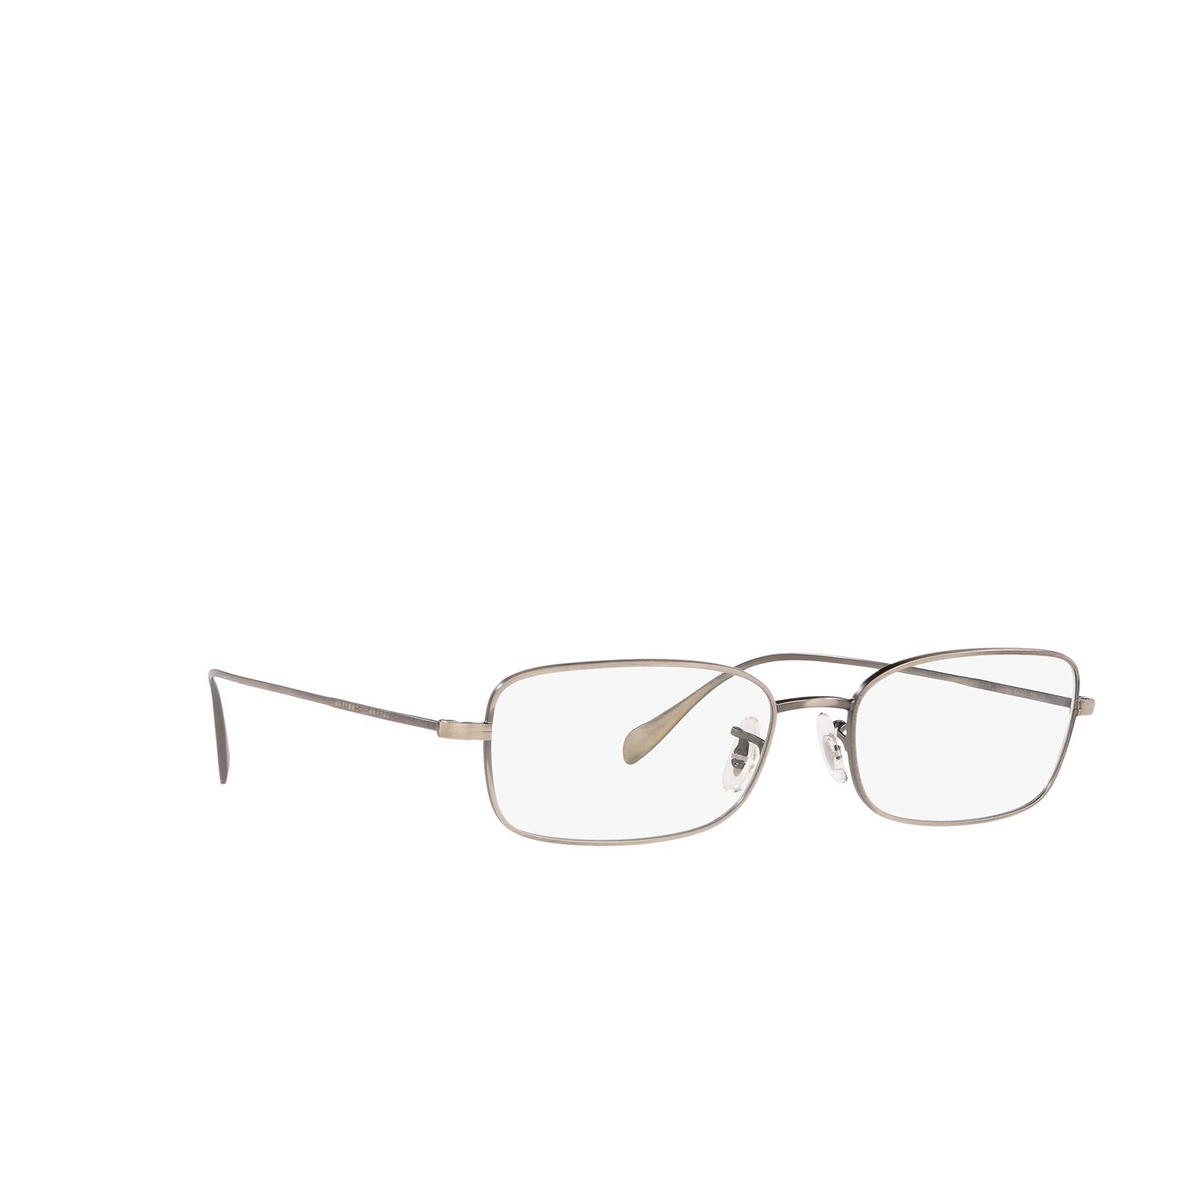 Oliver Peoples® Rectangle Eyeglasses: Aronson OV1253 color New Antique Pewter 5289 - three-quarters view.